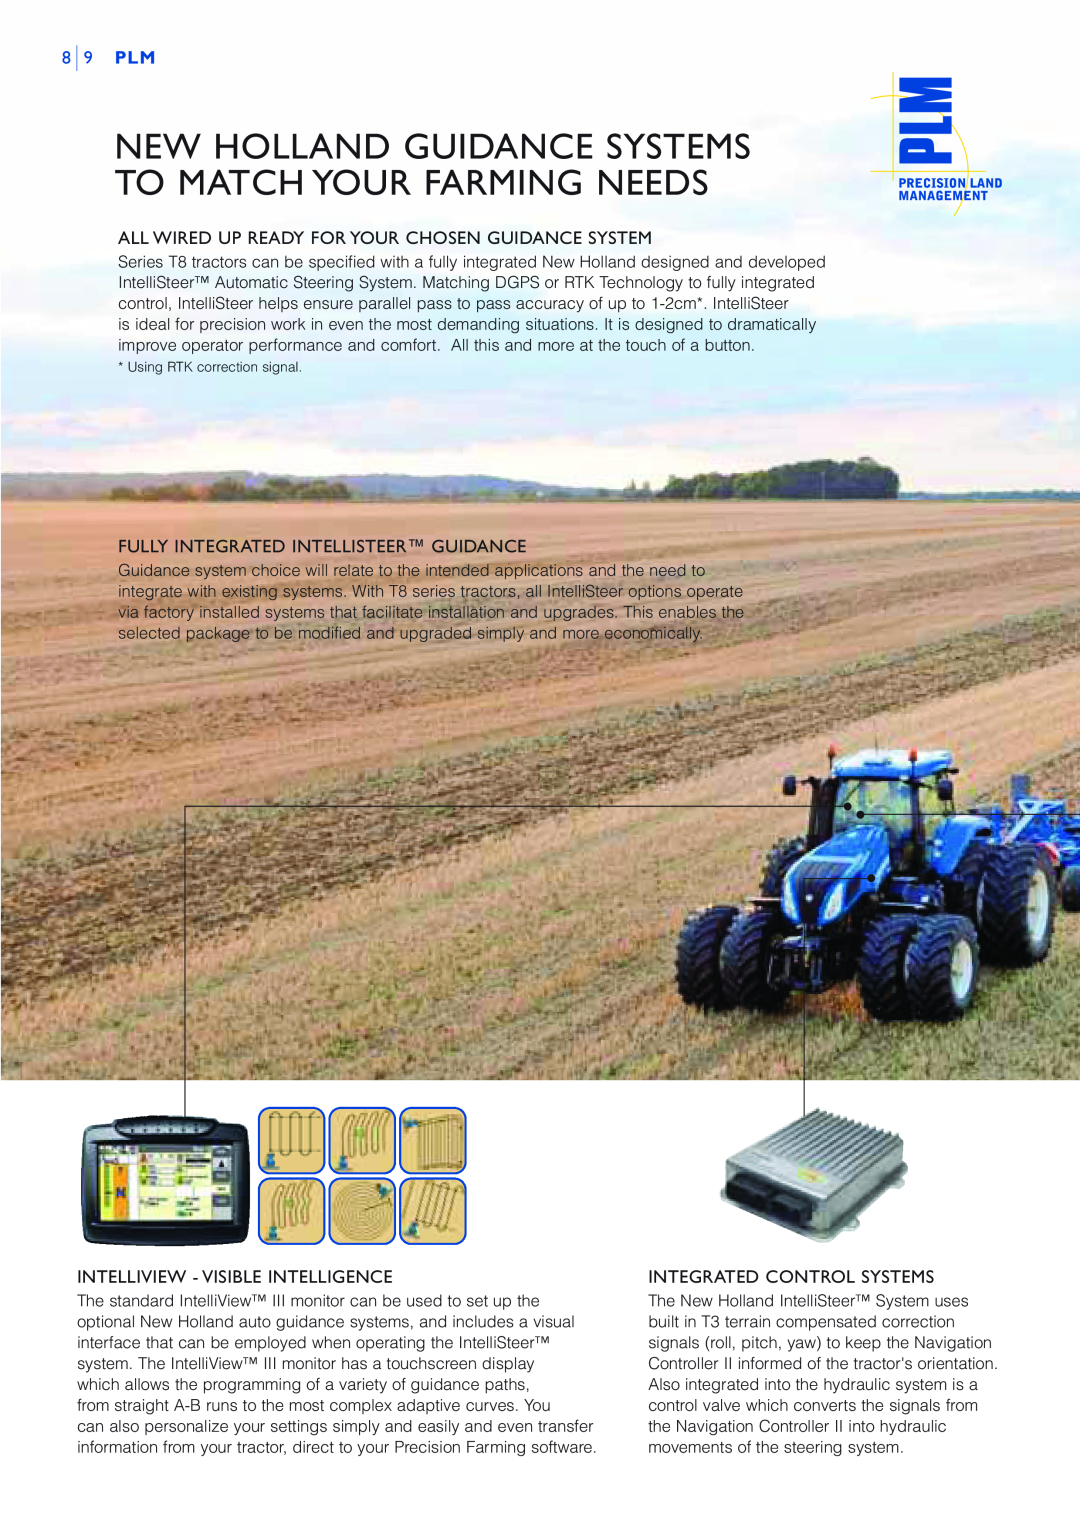 Fiat T8.39O manual New Holland Guidance Systems To Match Your Farming Needs, 9 PLM, Fully Integrated Intellisteer Guidance 